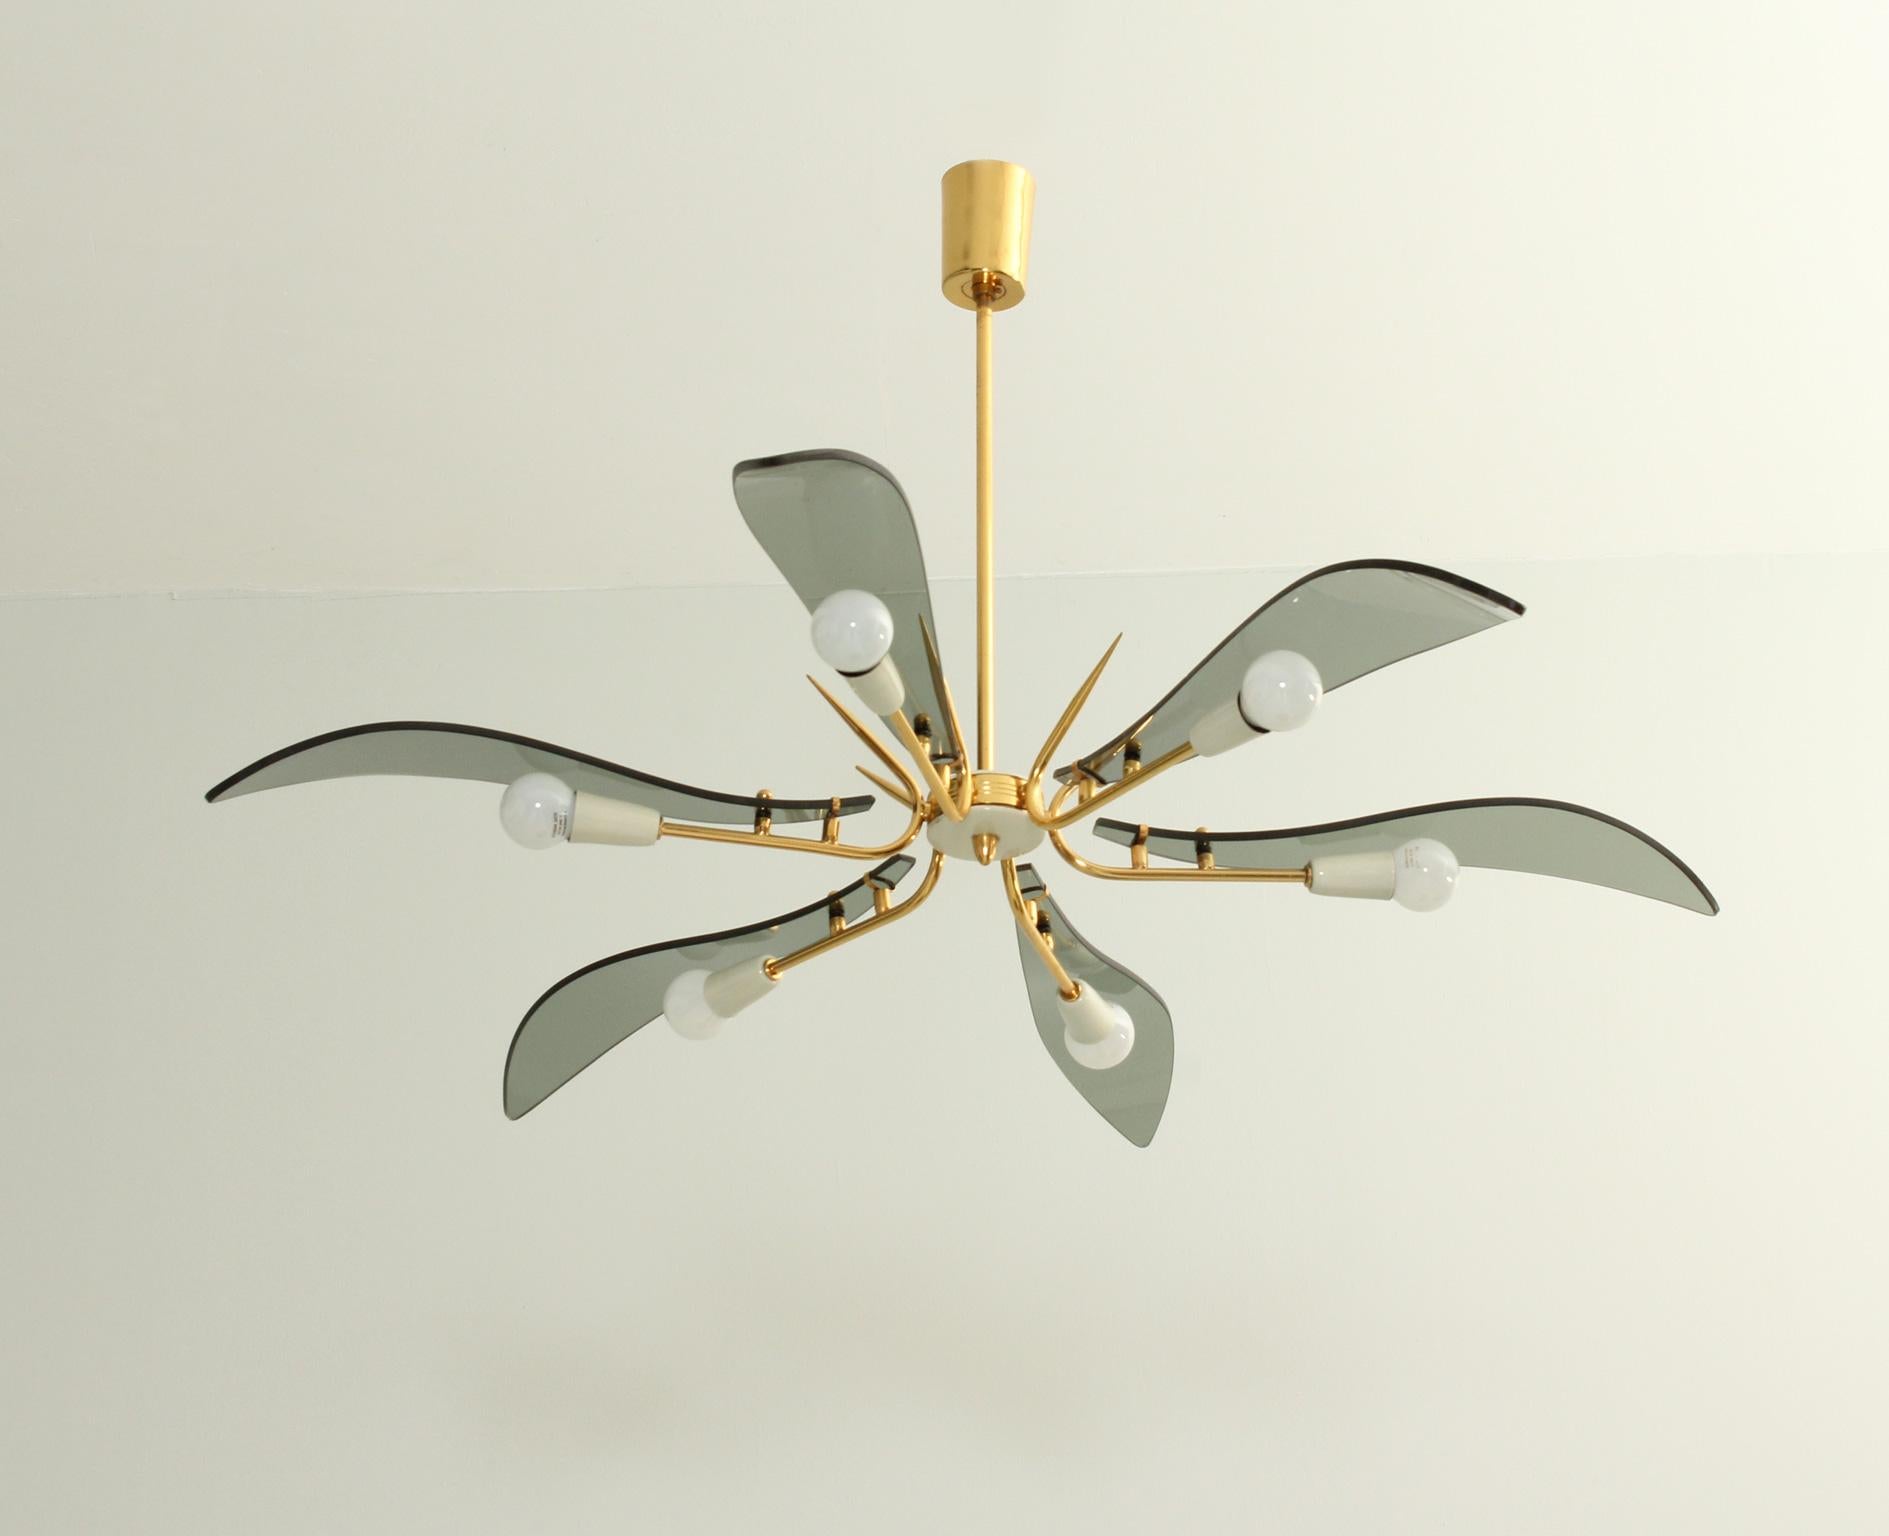 Large chandelier attributed to Fontana Arte, Italy, 1950's. Six petals in smoked glass and brass and lacquered metal structure.